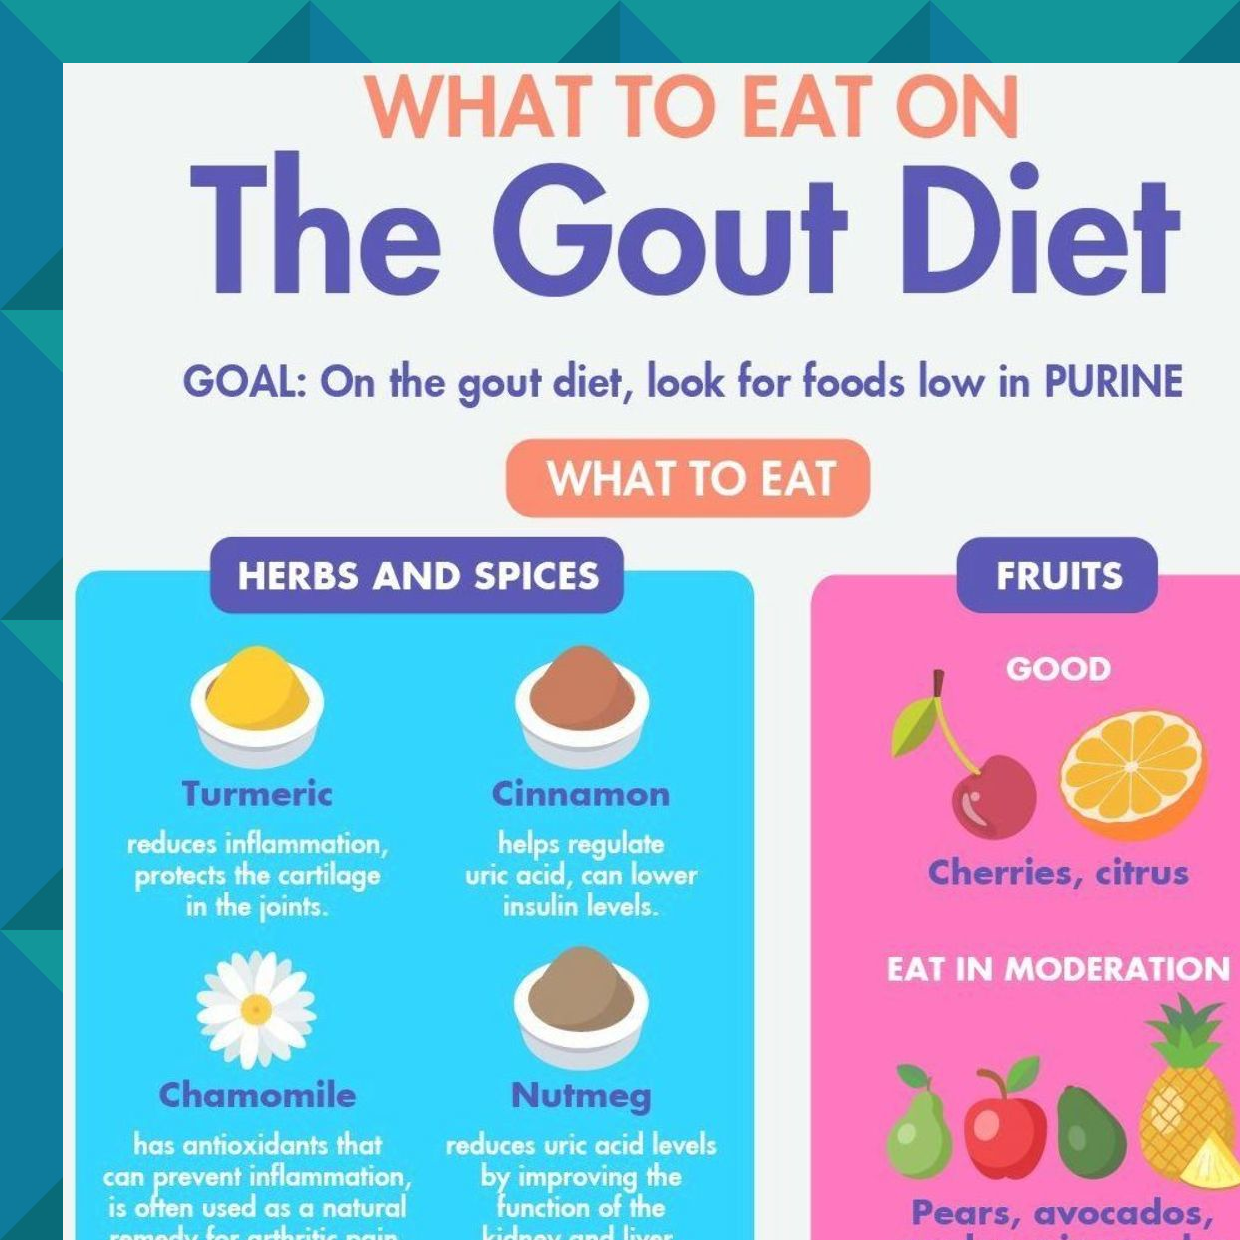 GOUT DIET: WHAT TO EAT AND WHAT NOT TO EAT